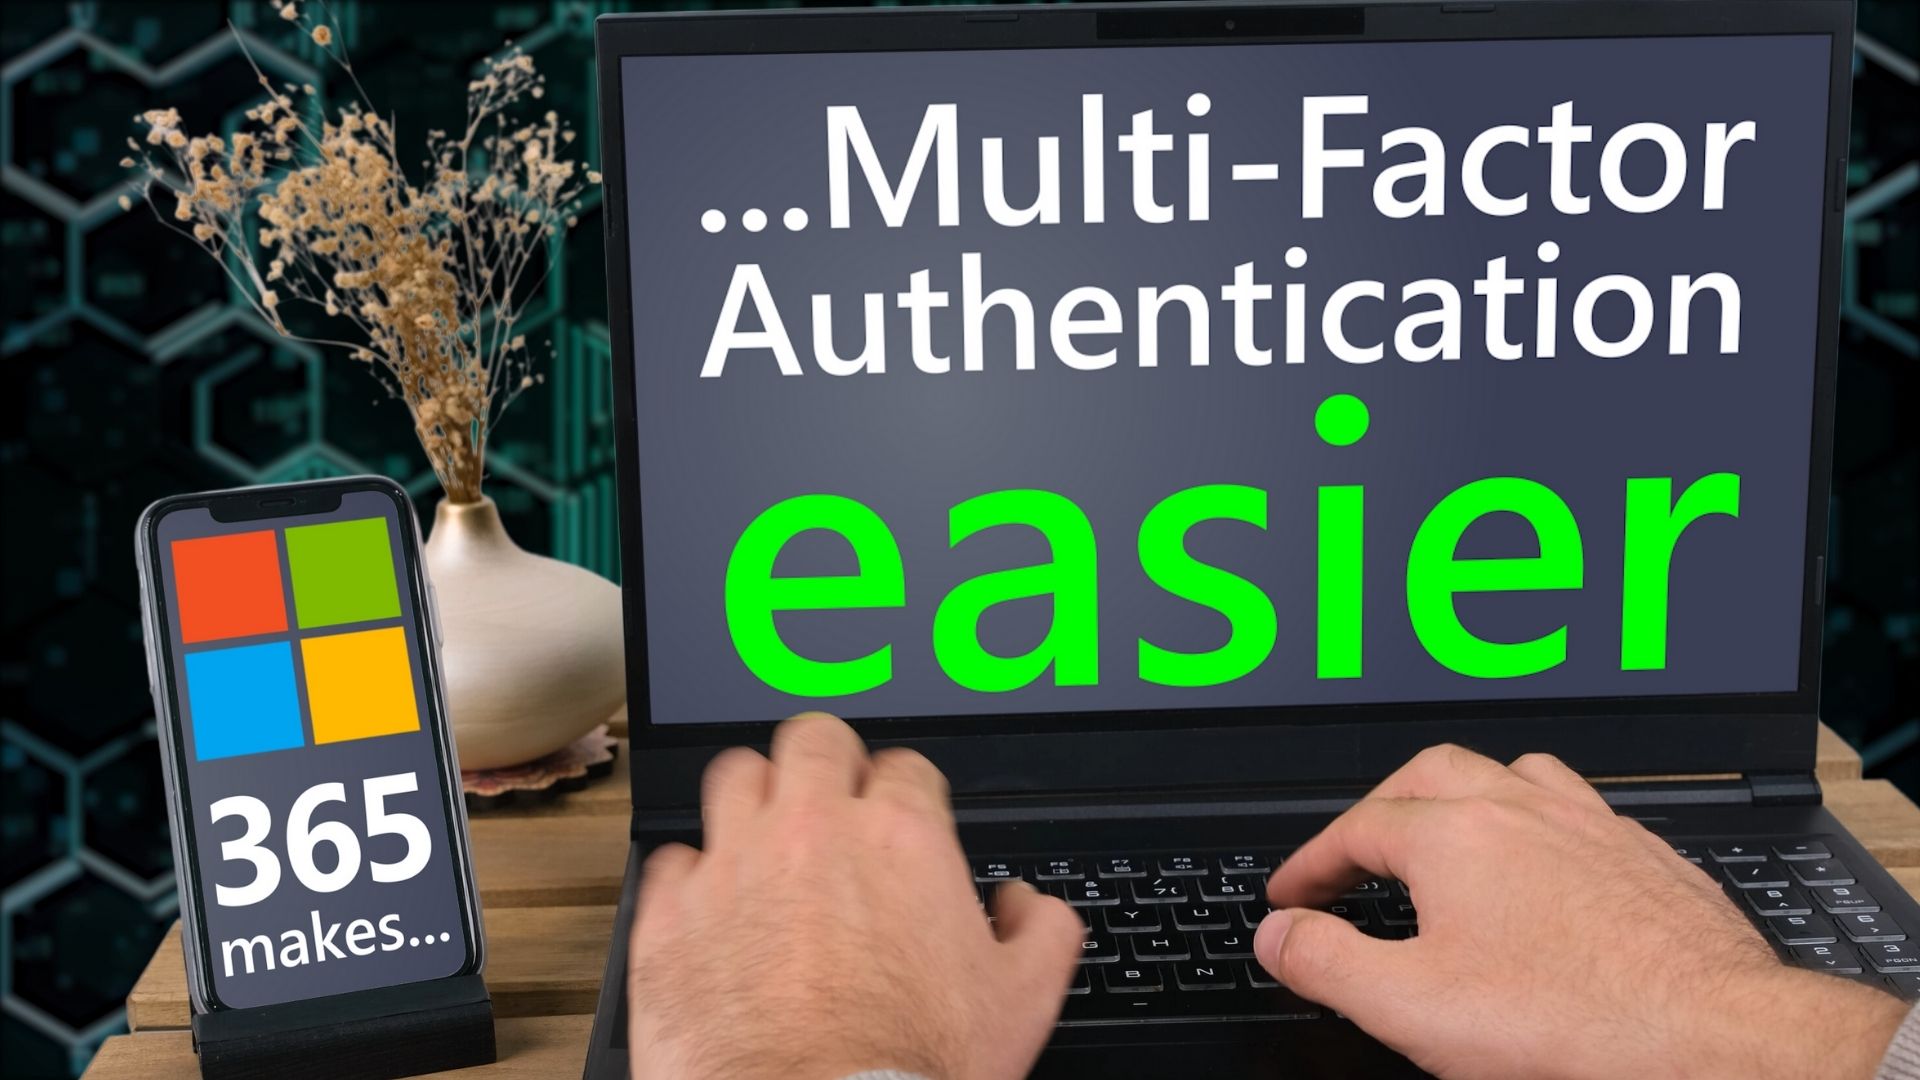 Easier Multifactor Authentication